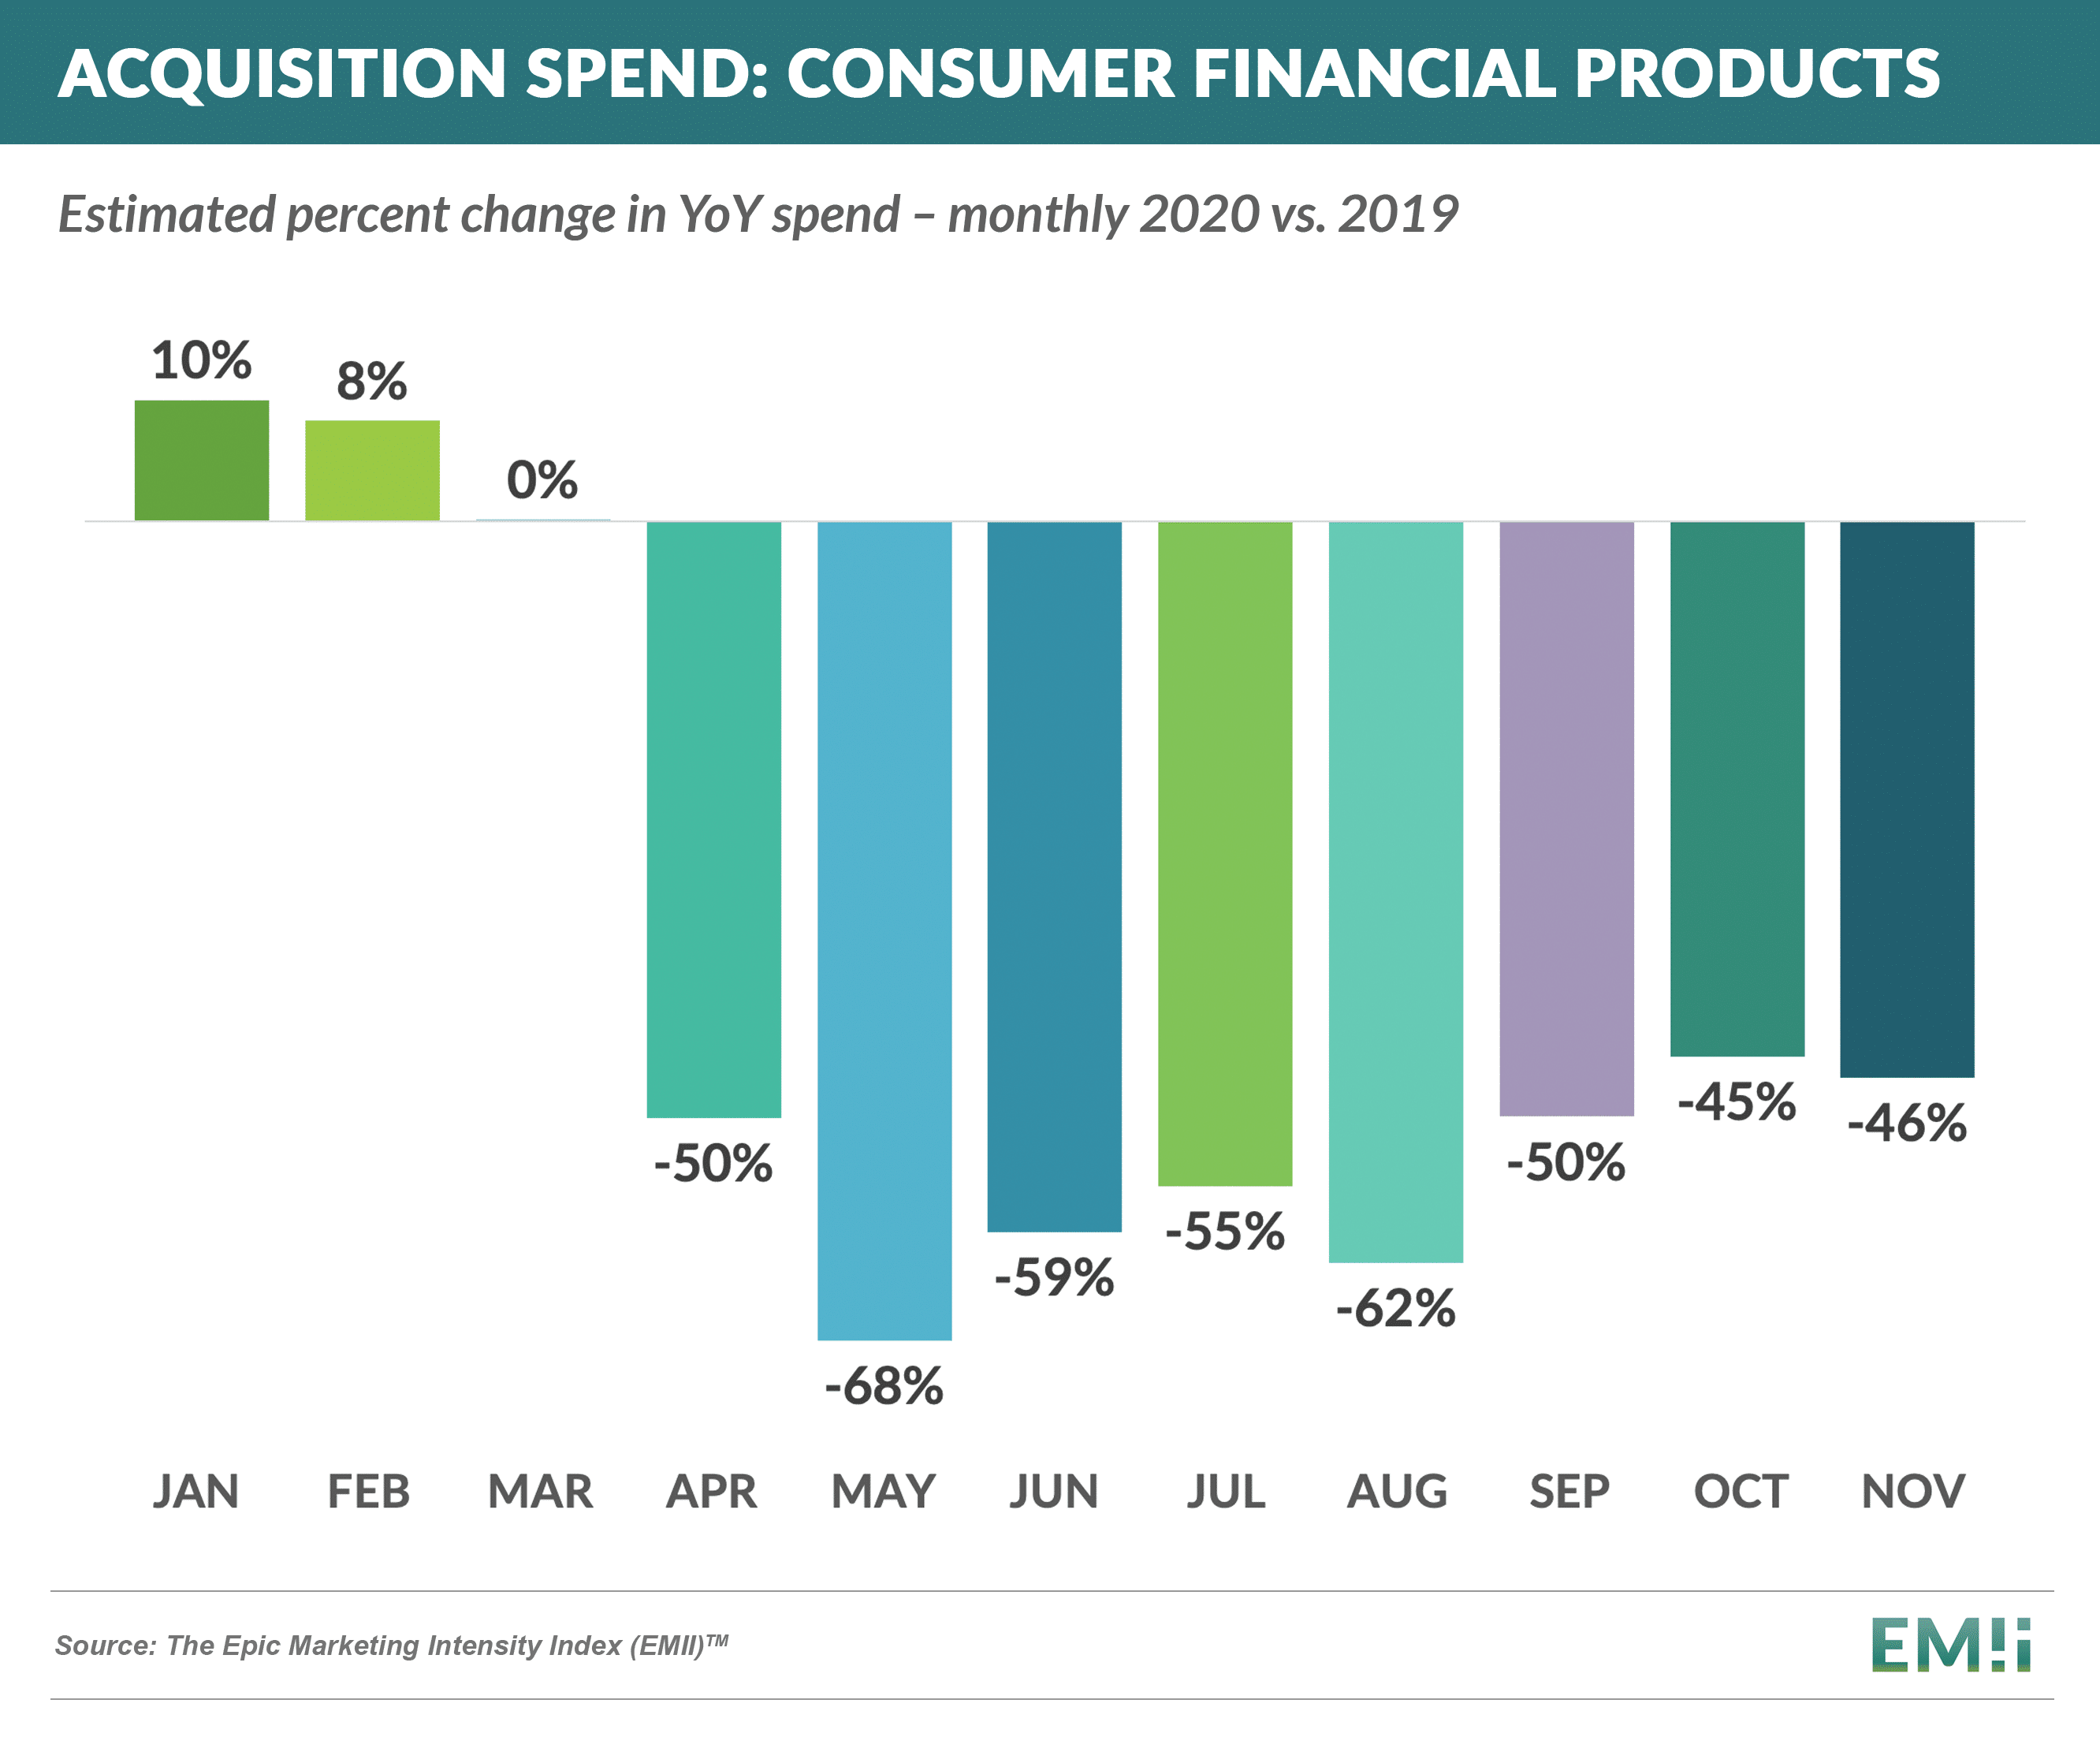 EMII - acquisition spend - consumer finance products